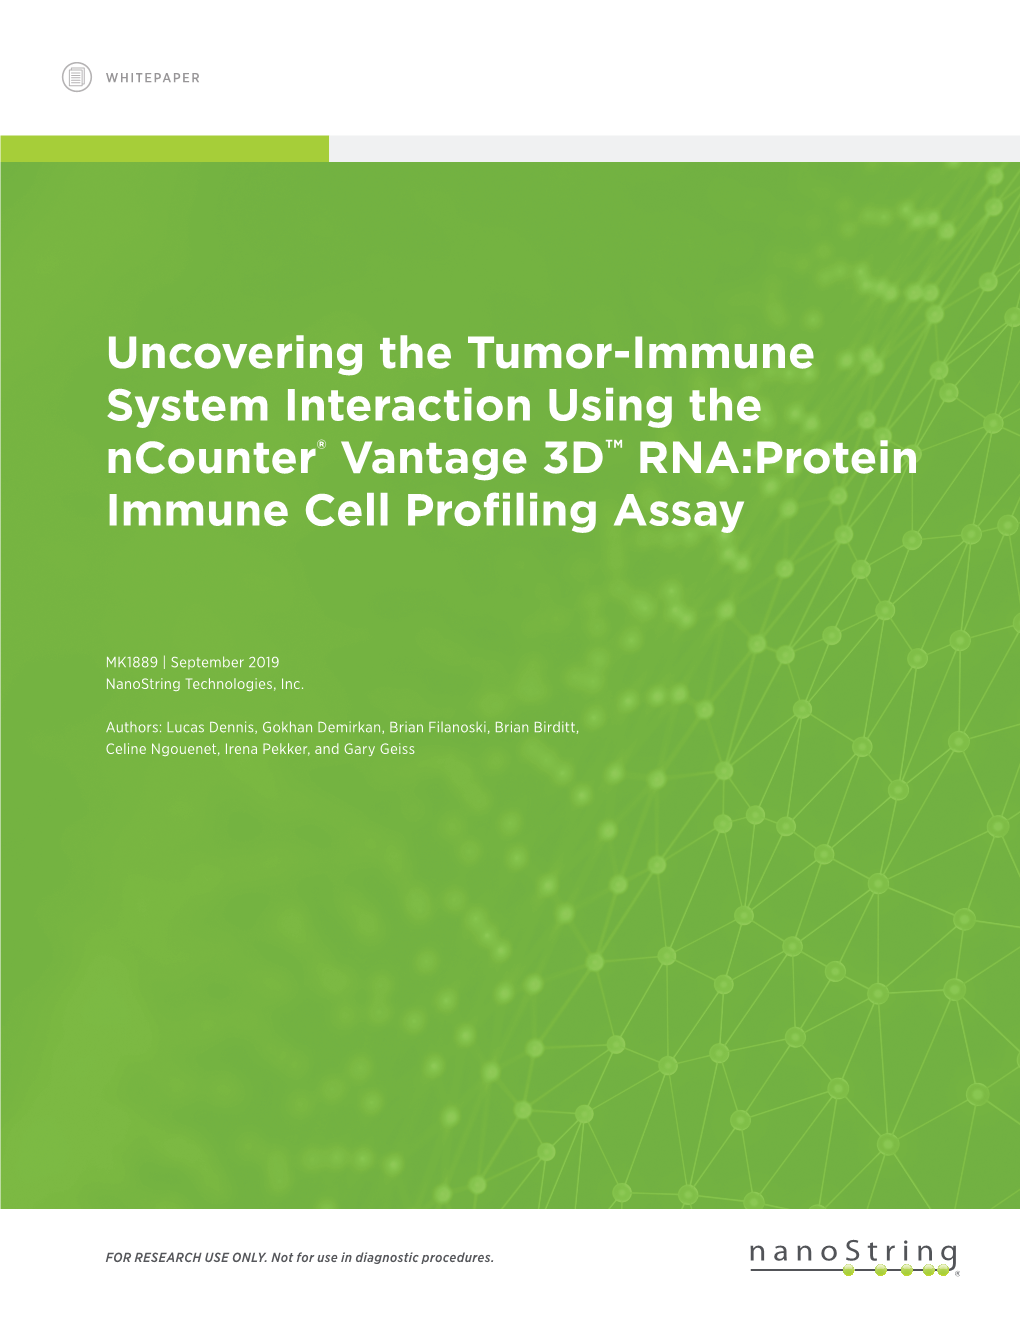 Uncovering the Tumor-Immune System Interaction Using the Ncounter® Vantage 3D™ RNA:Protein Immune Cell Profiling Assay